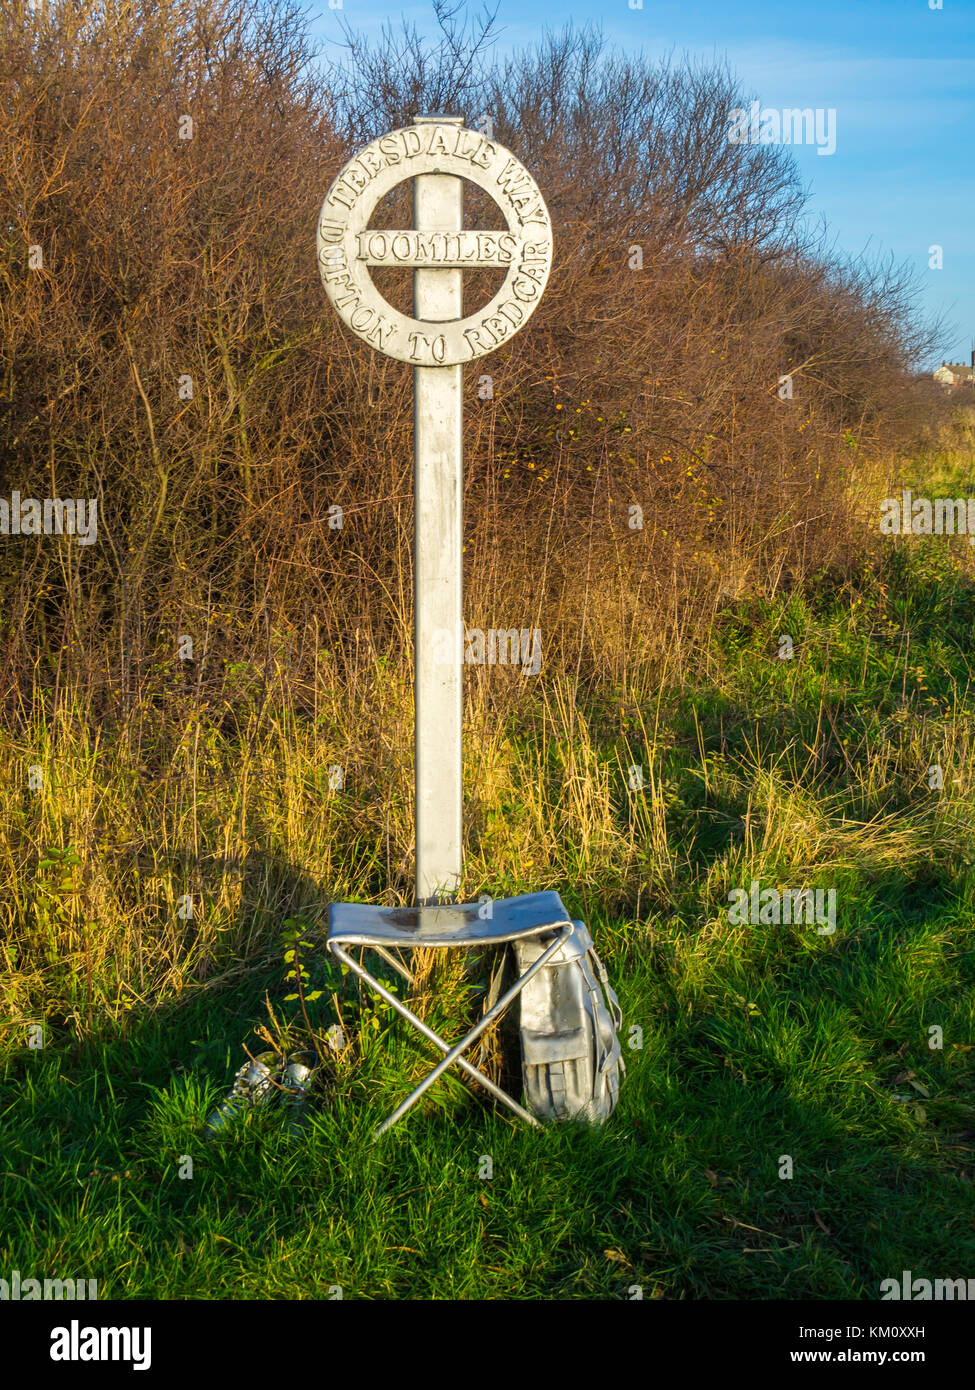 Coatham Marsh Nature reserve a sculpture of a signpost rucksack and stool marking the end of the Teesdale Way long distance walk Stock Photo